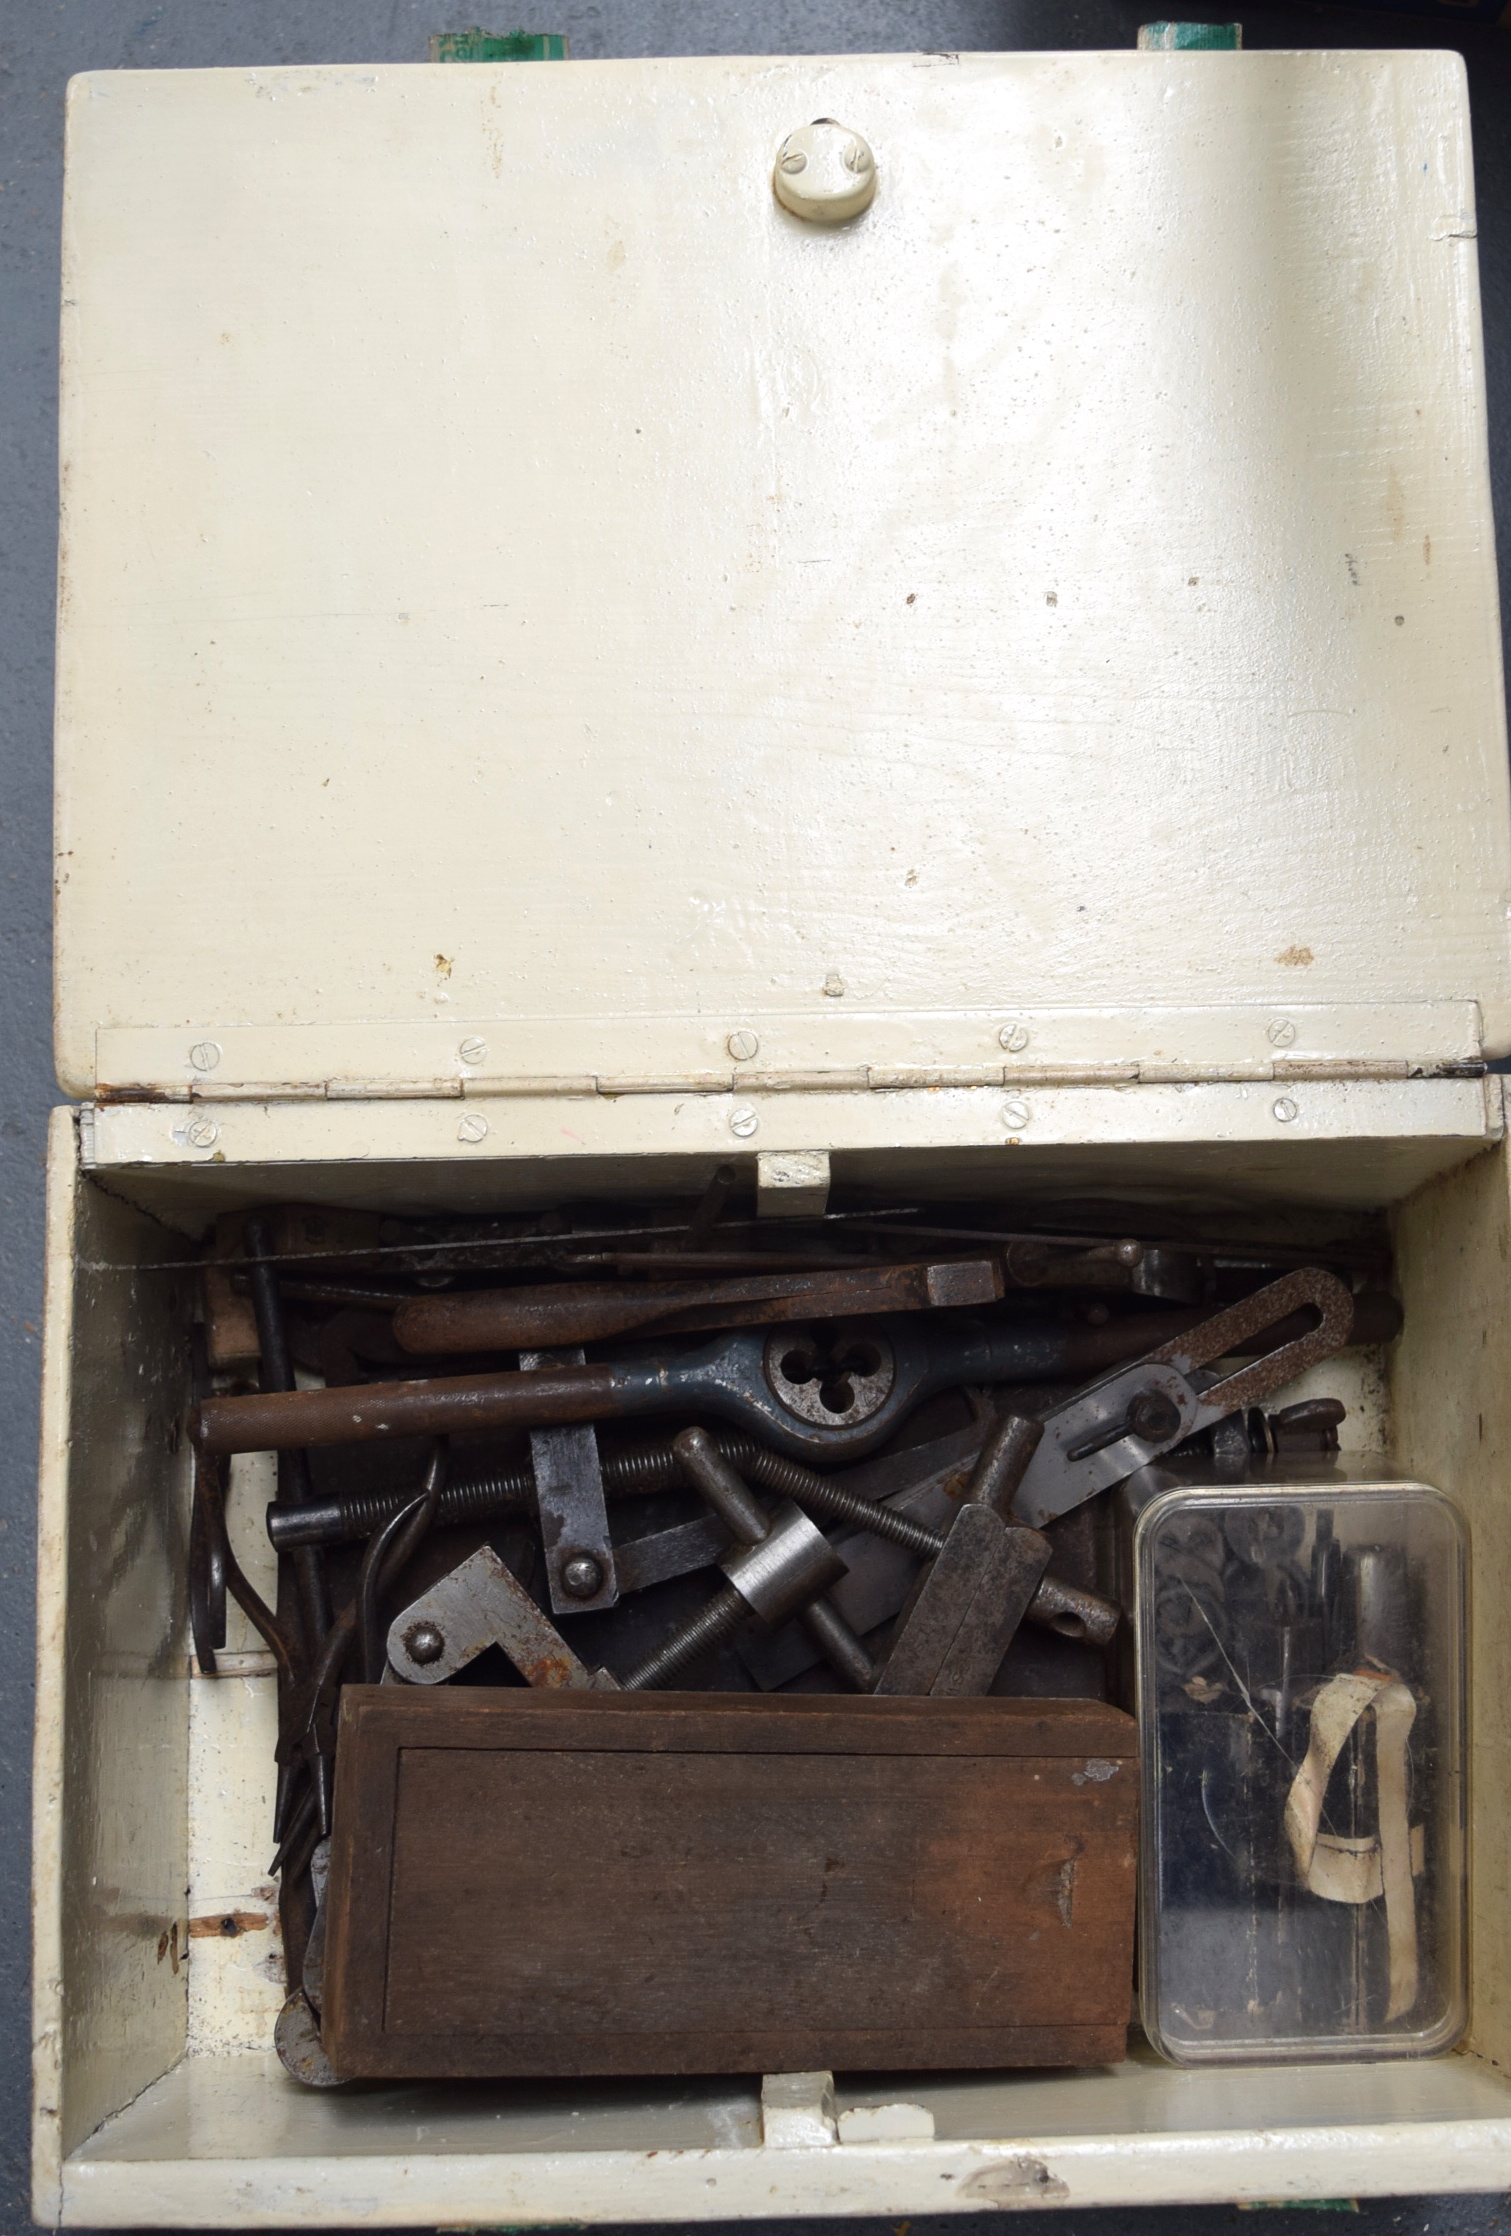 A QUANTITY OF CLOCK MAKERS TOOLS, contained within a wooden box.